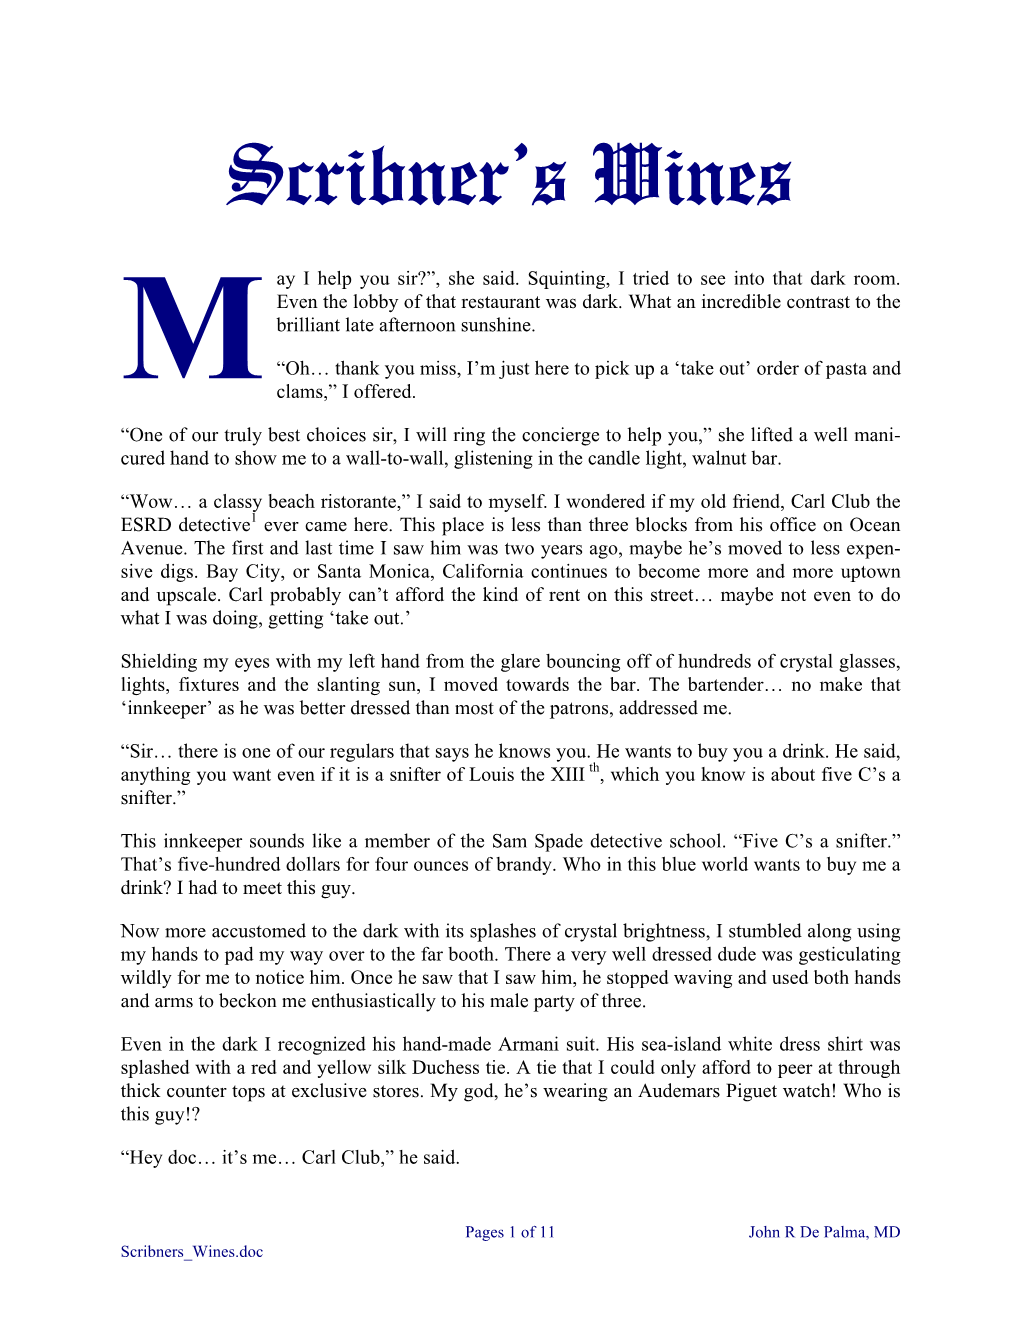 Scribner's Wines, a Fable